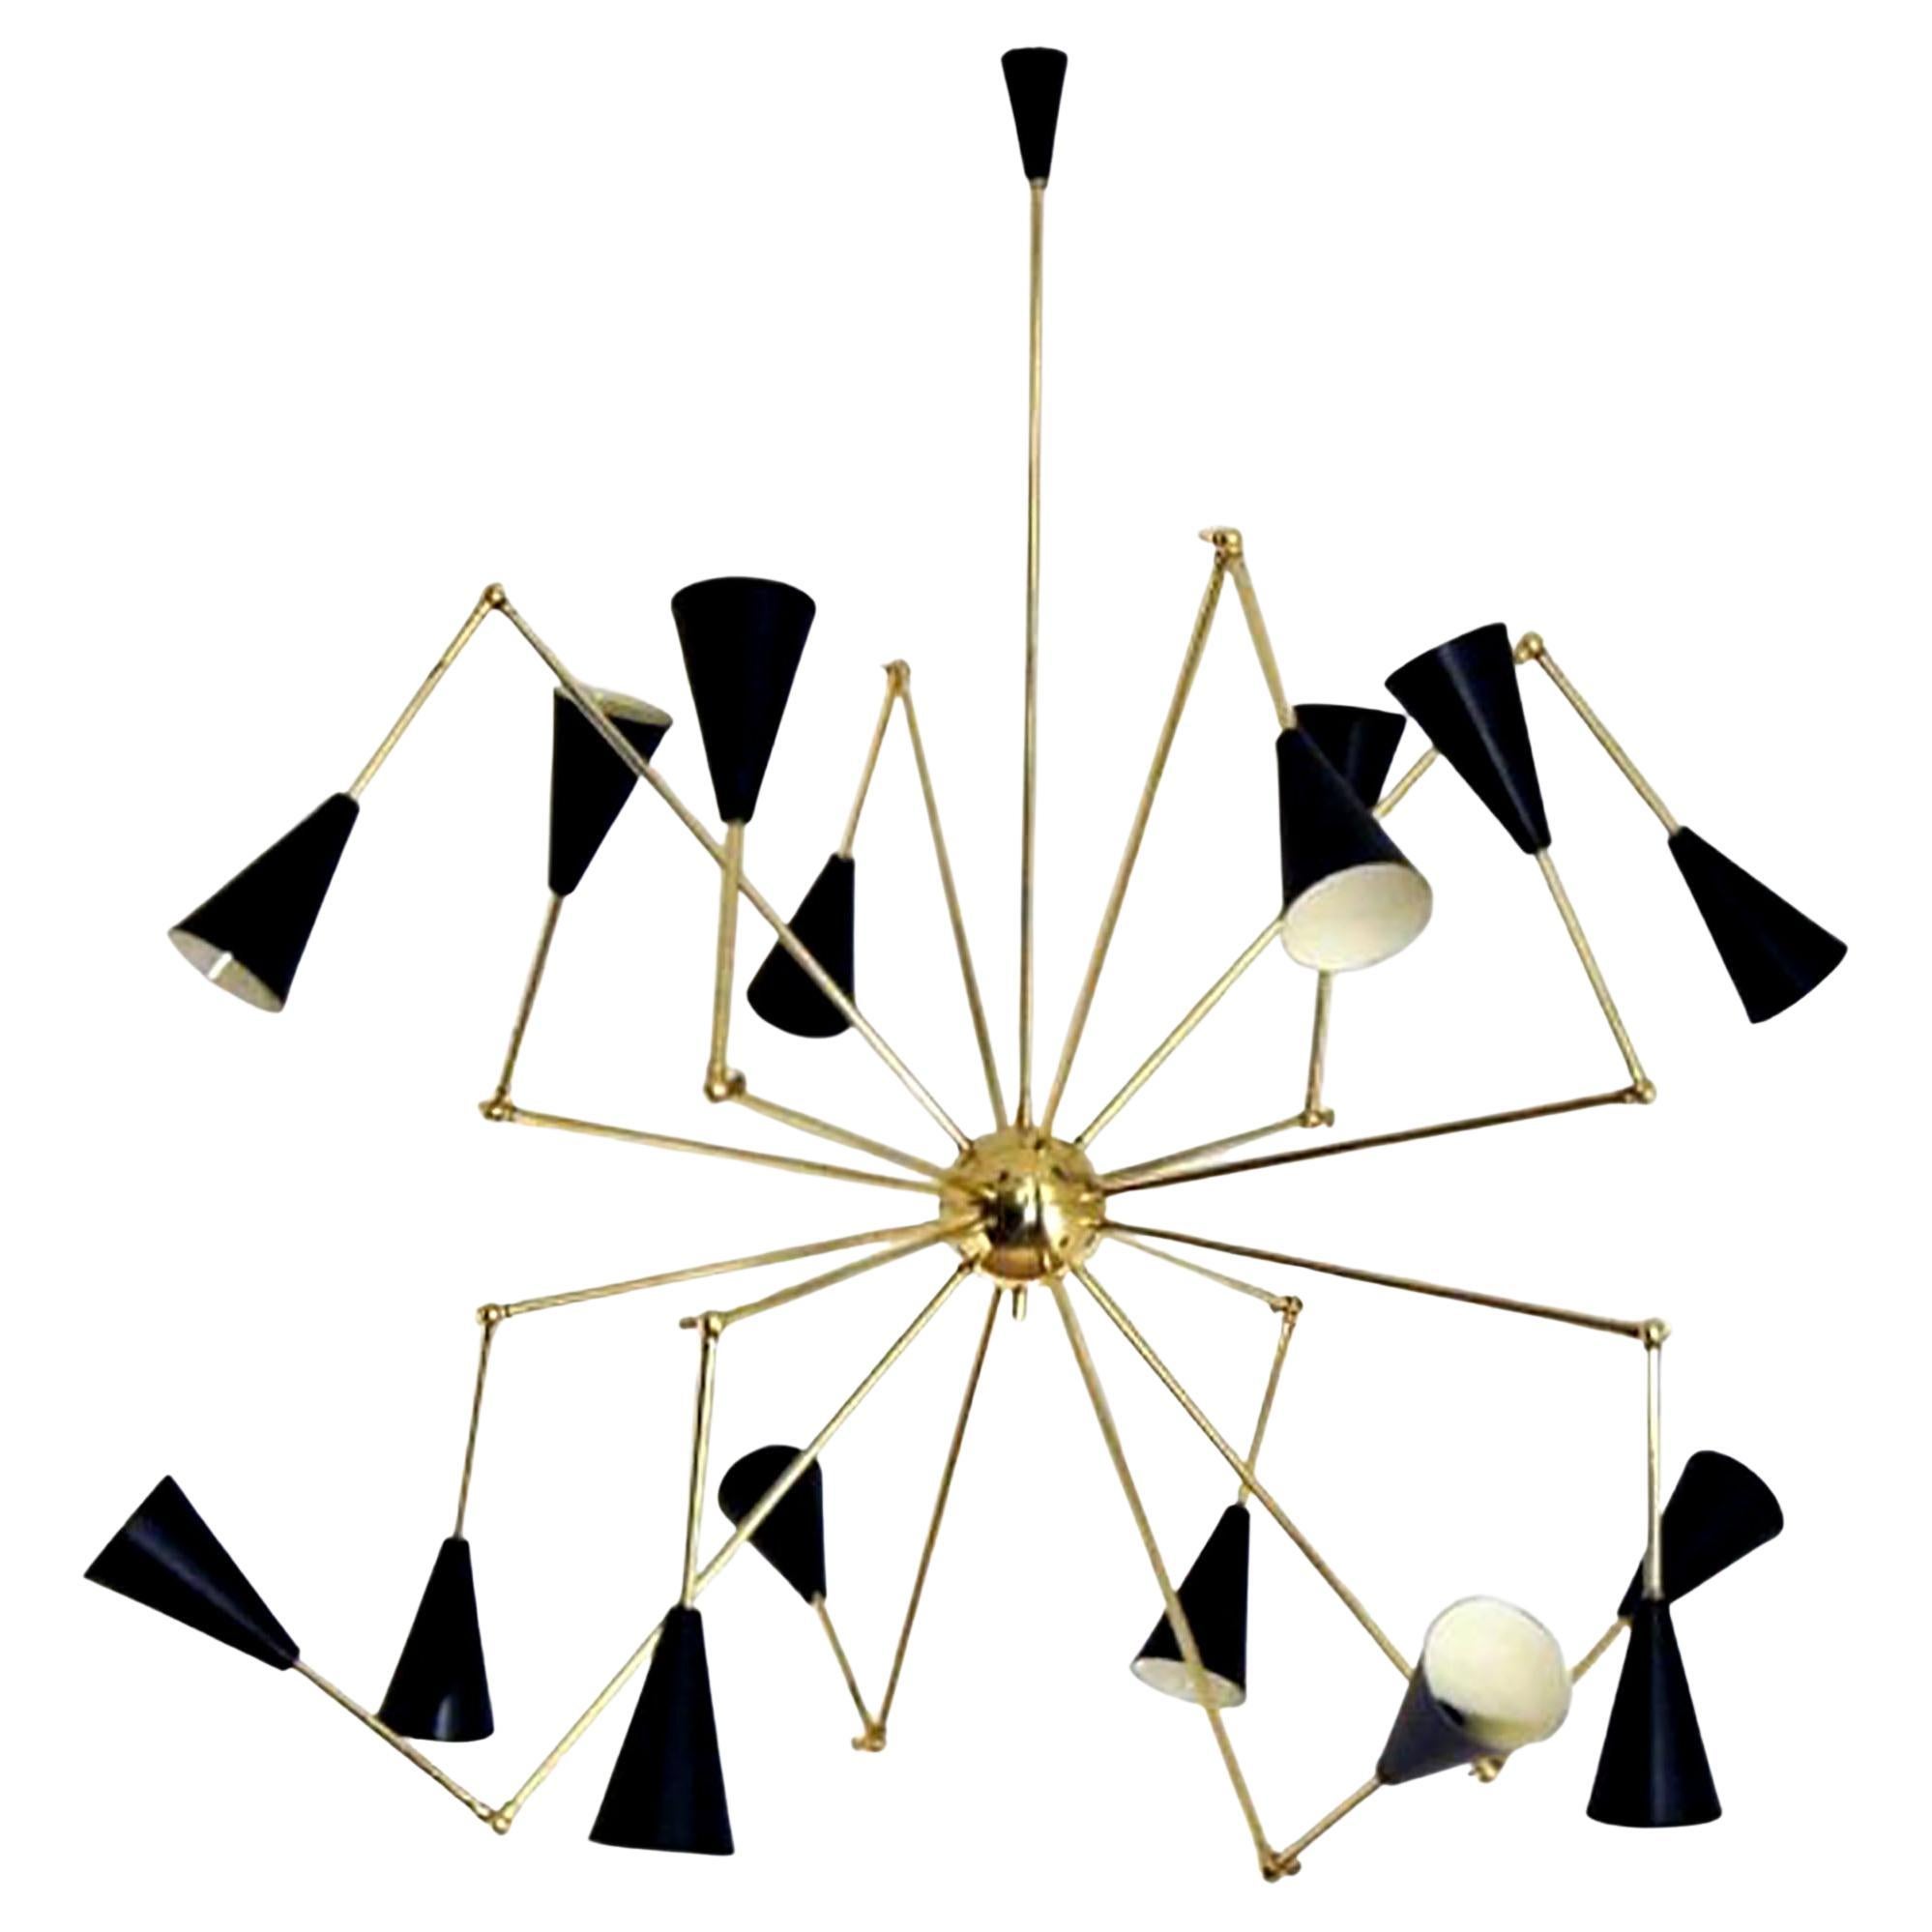 Italian Brass Chandelier with 16 Articulated Arms For Sale